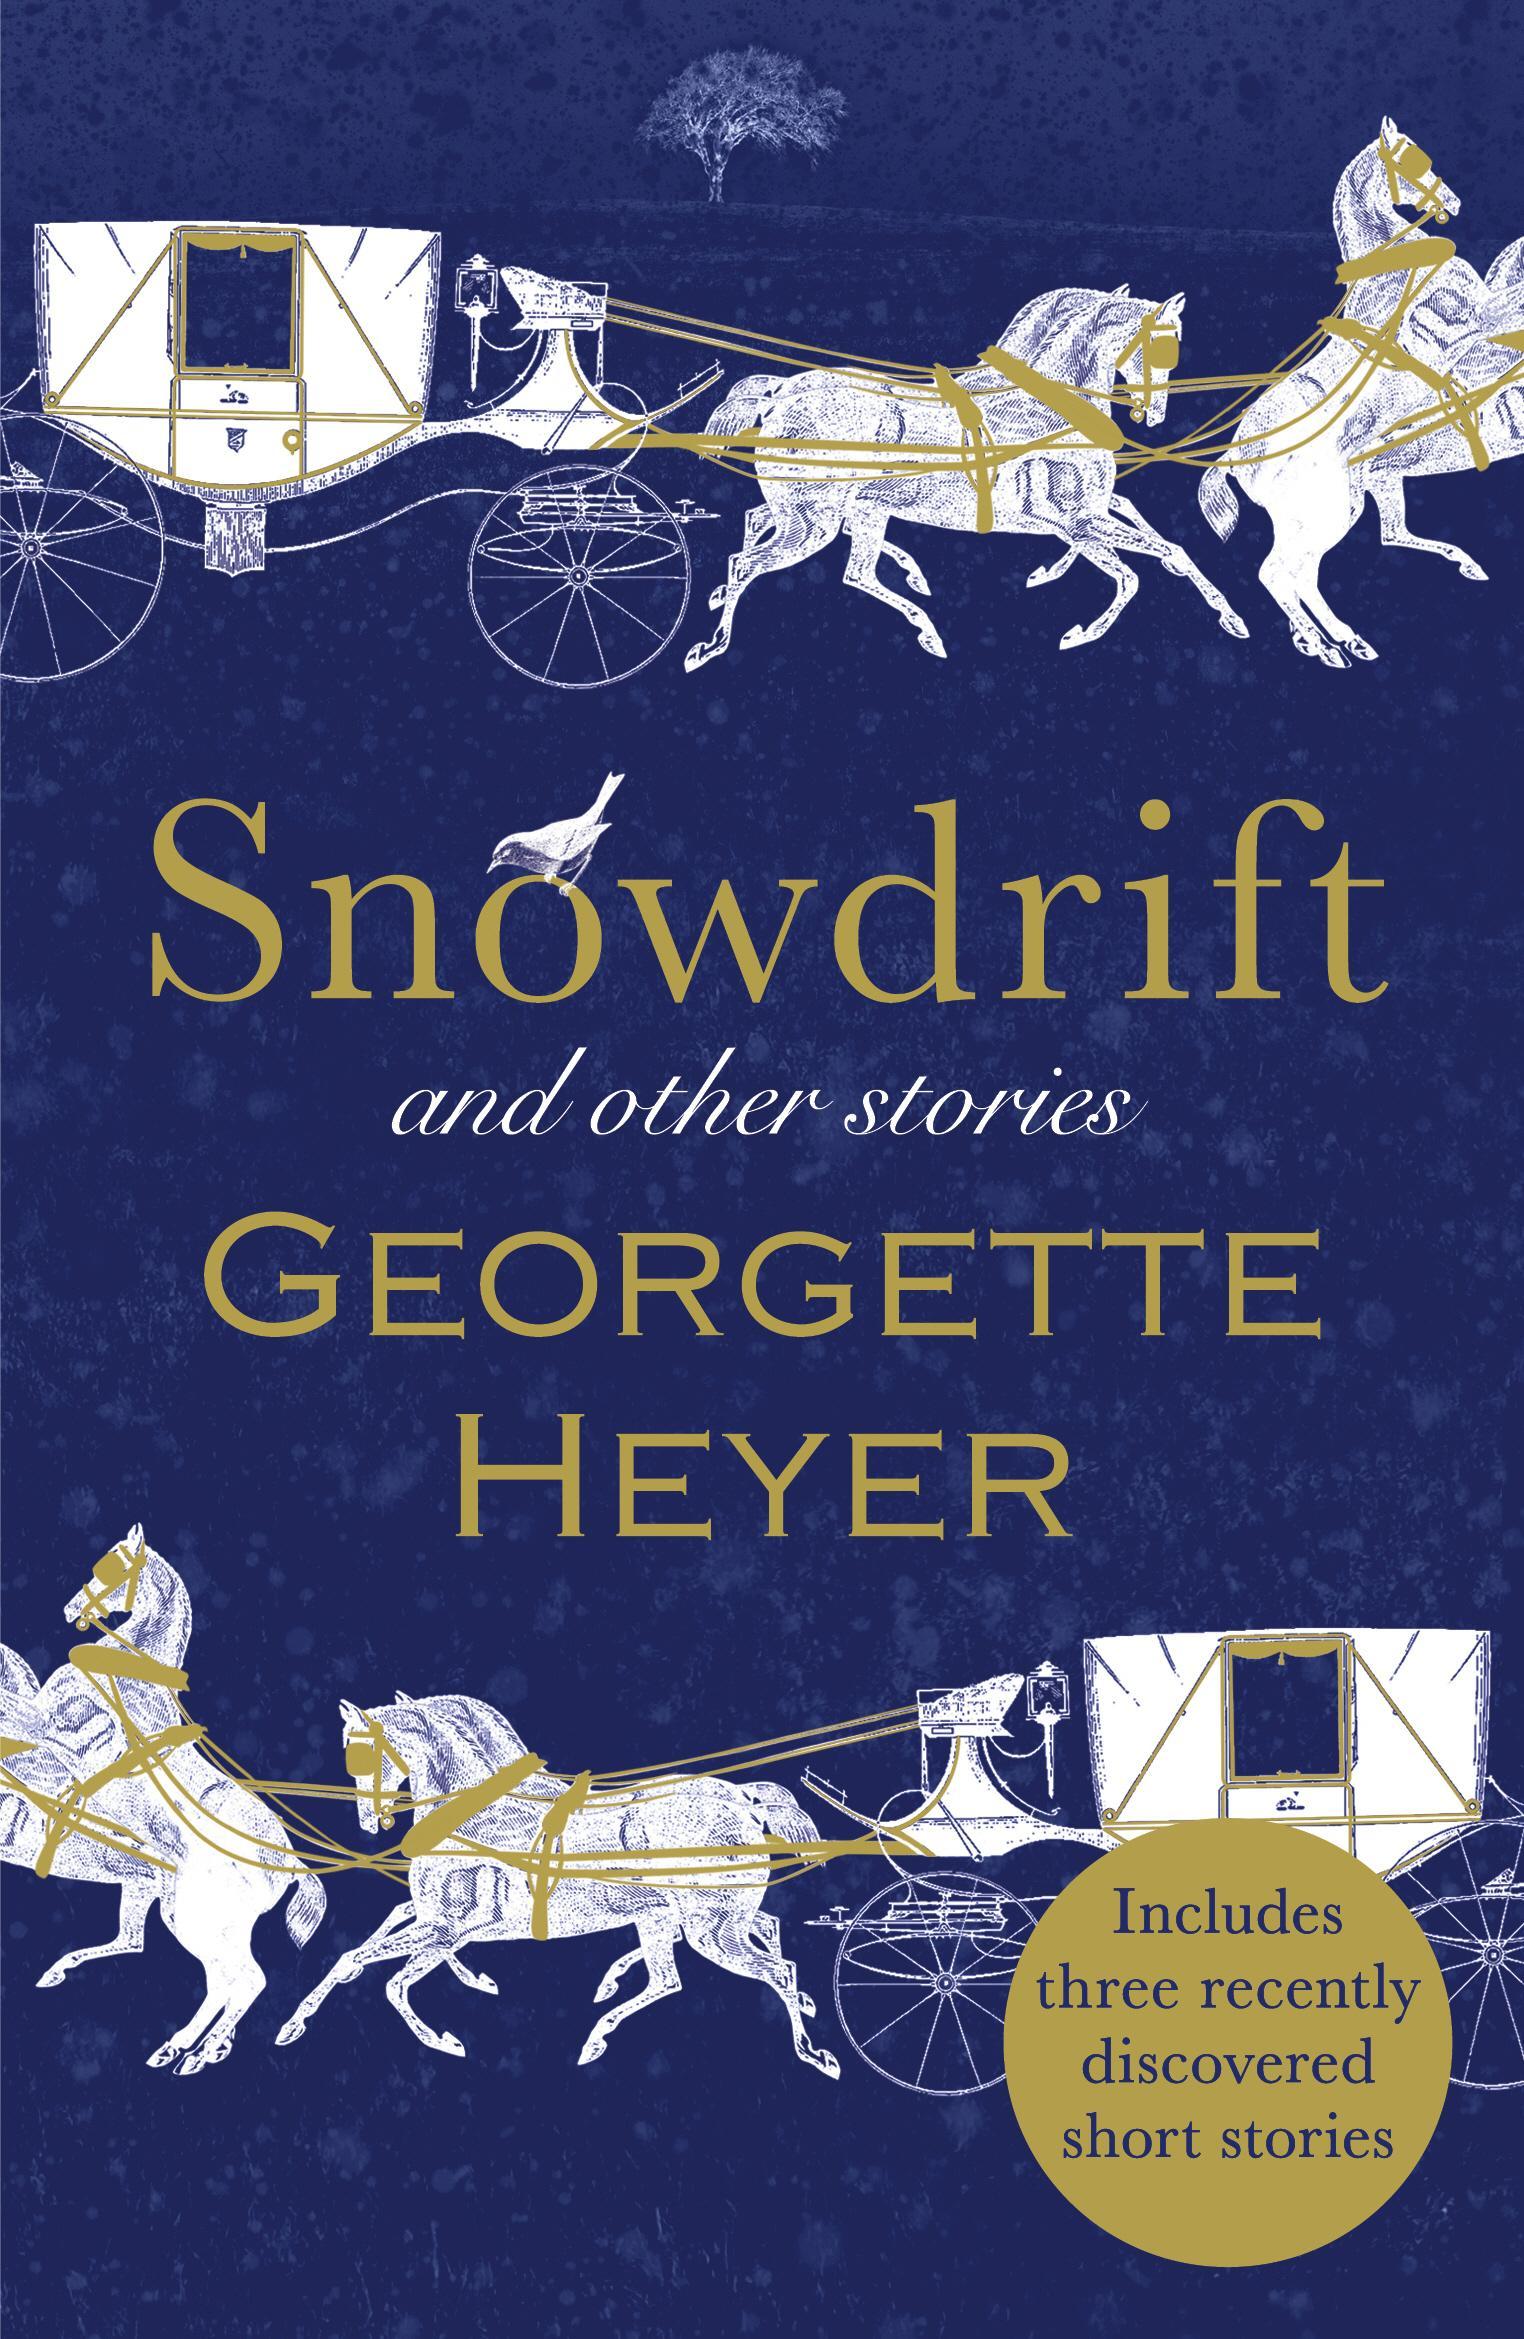 Snowdrift and Other Stories (includes three new recently dis